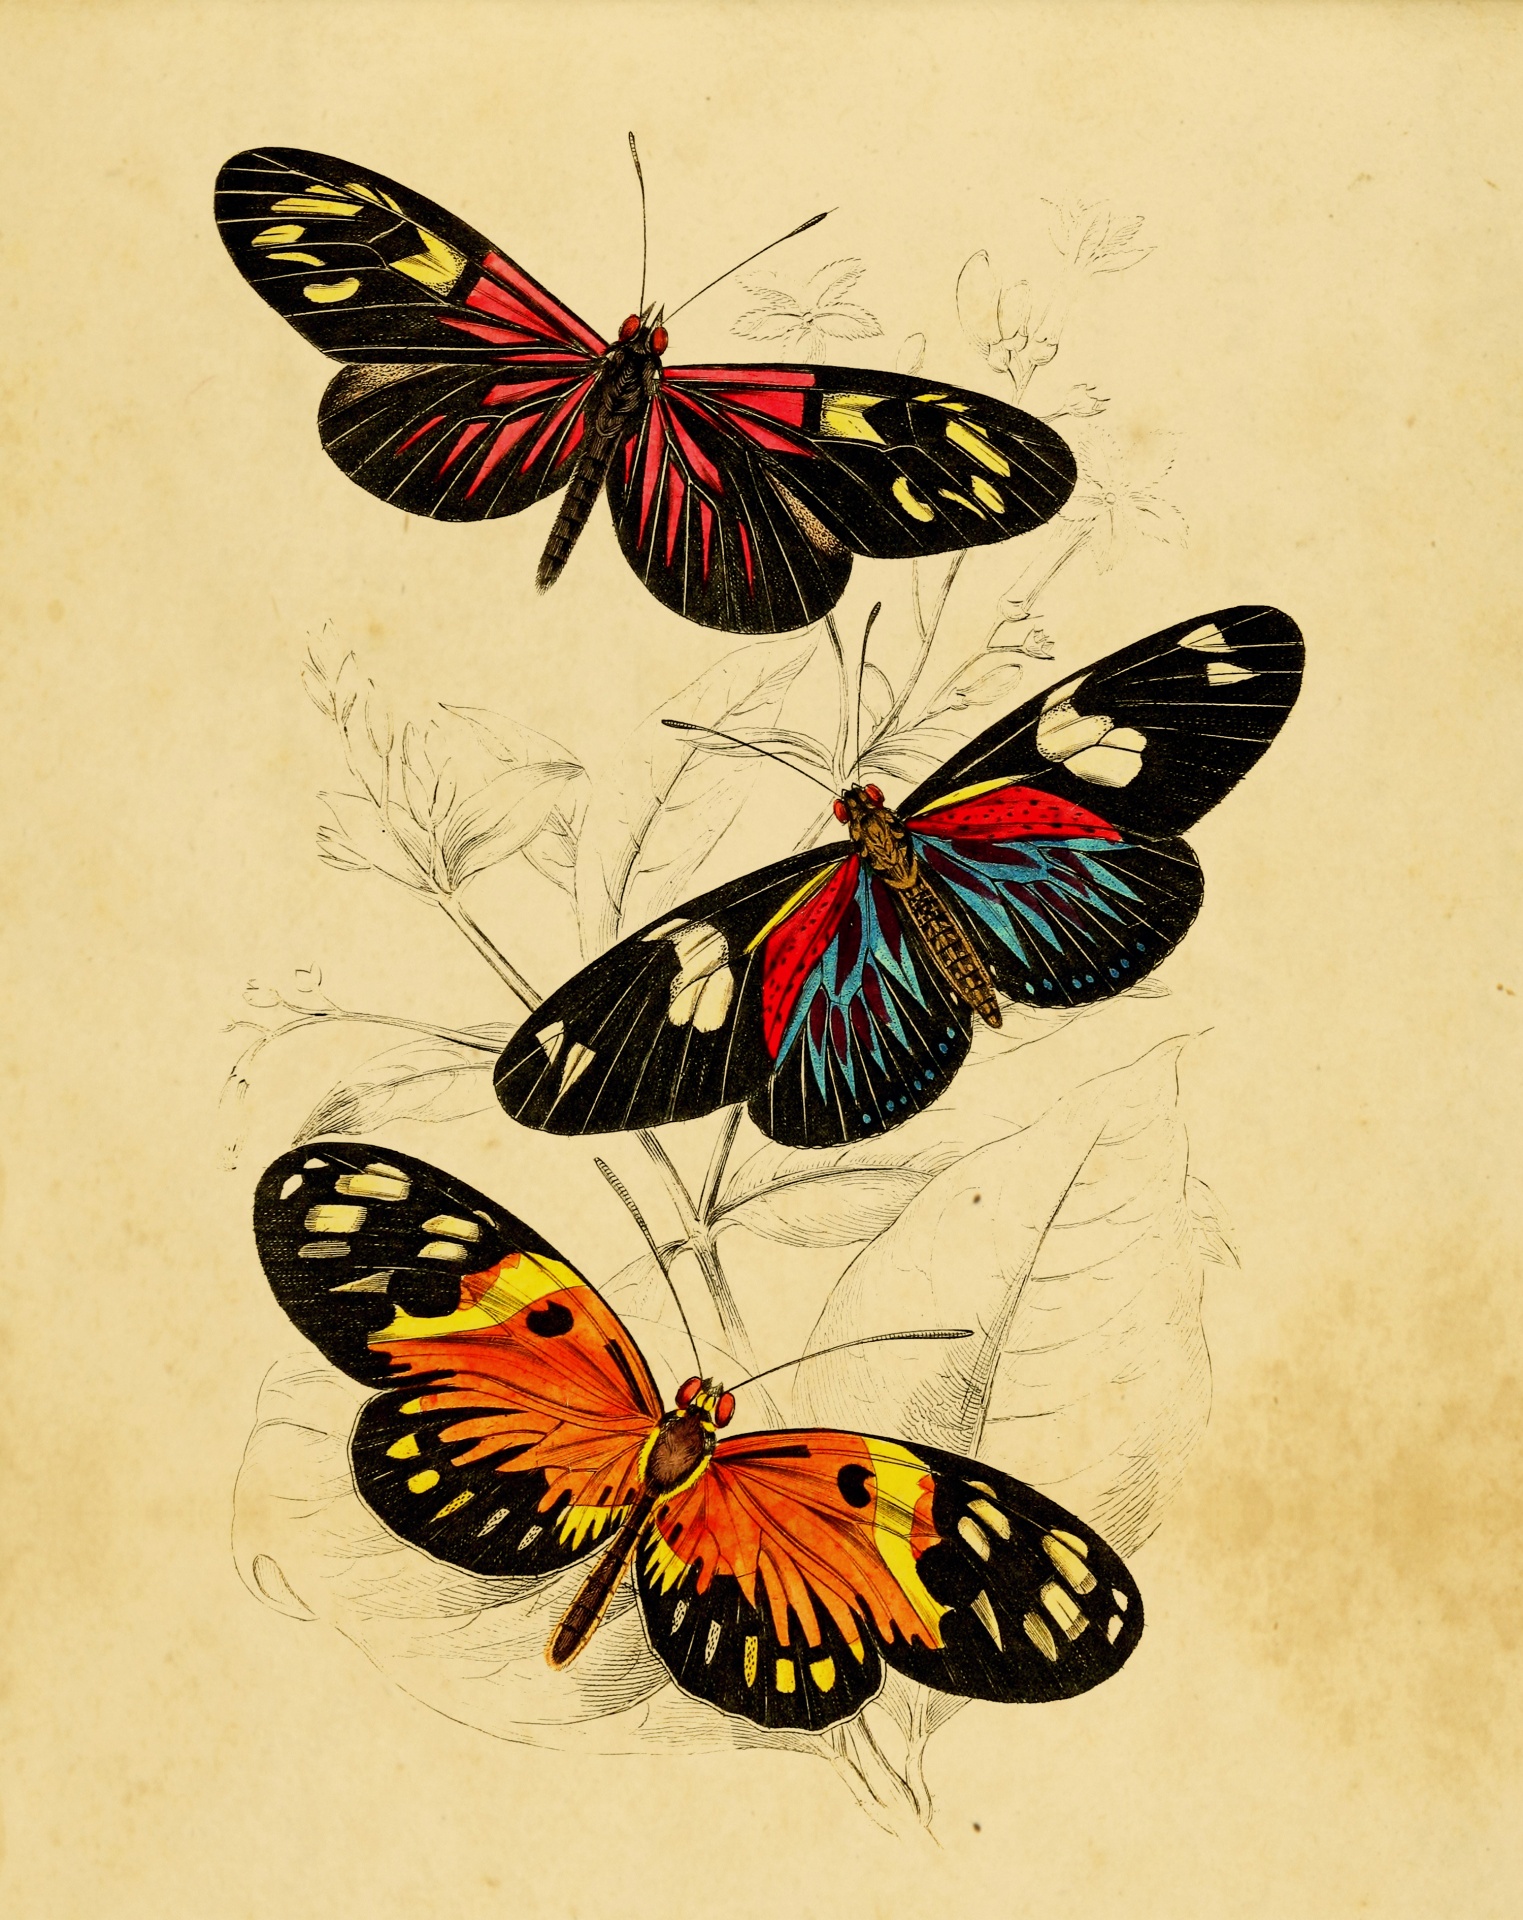 Background of three beautiful colorful vintage butterflies on old aged antique paper